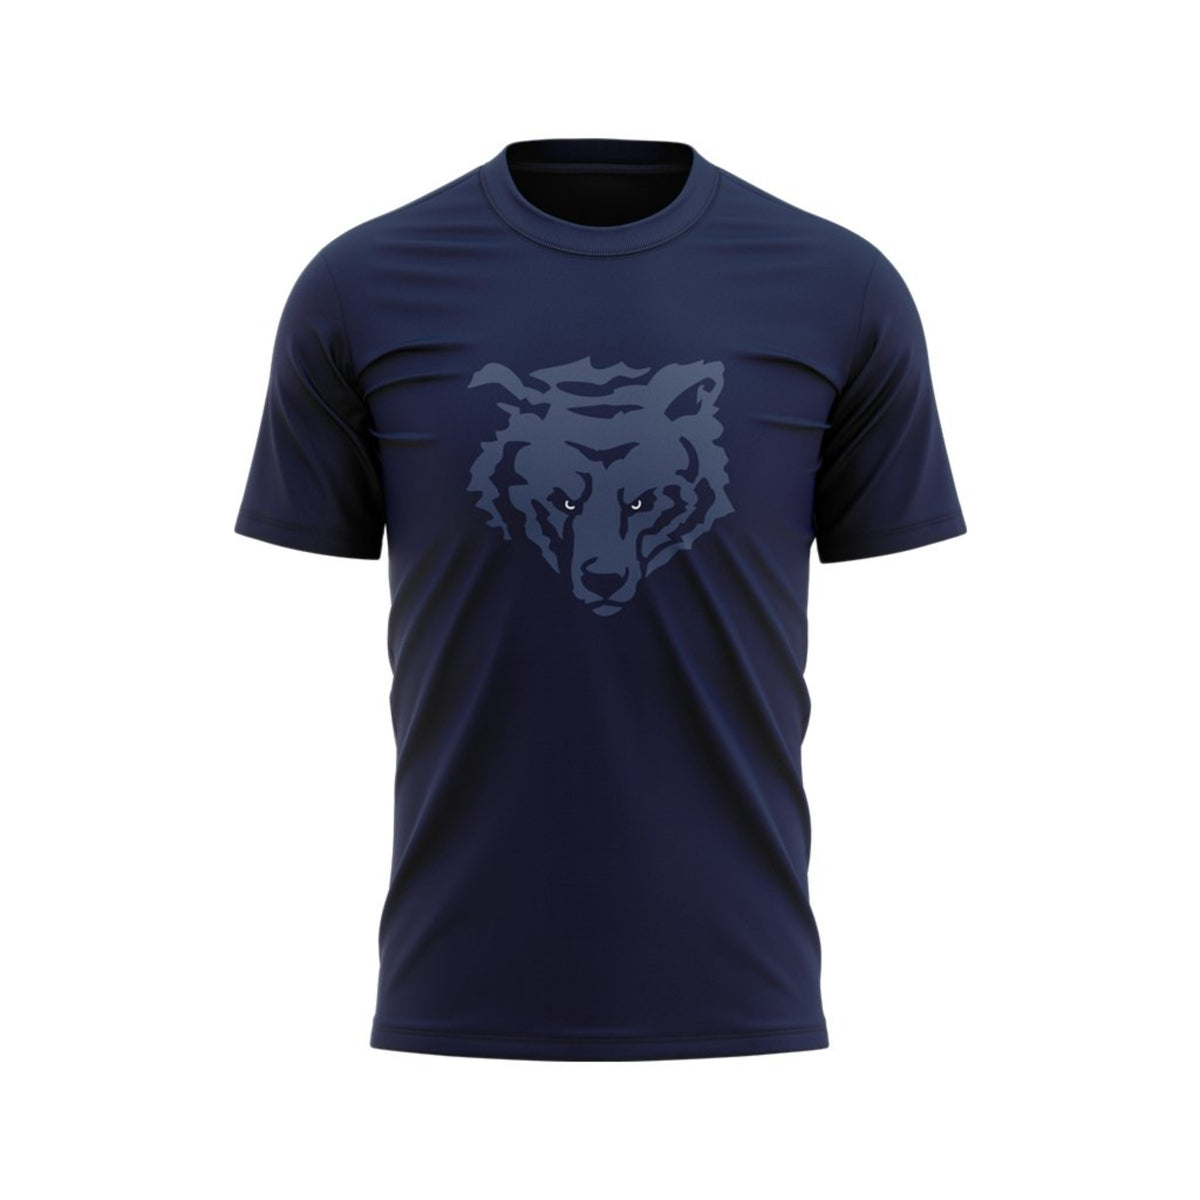 BC Rugby 2022 Stealth Tee - www.therugbyshop.com www.therugbyshop.com MEN&#39;S / NAVY / S XIX Brands TEES BC Rugby 2022 Stealth Tee